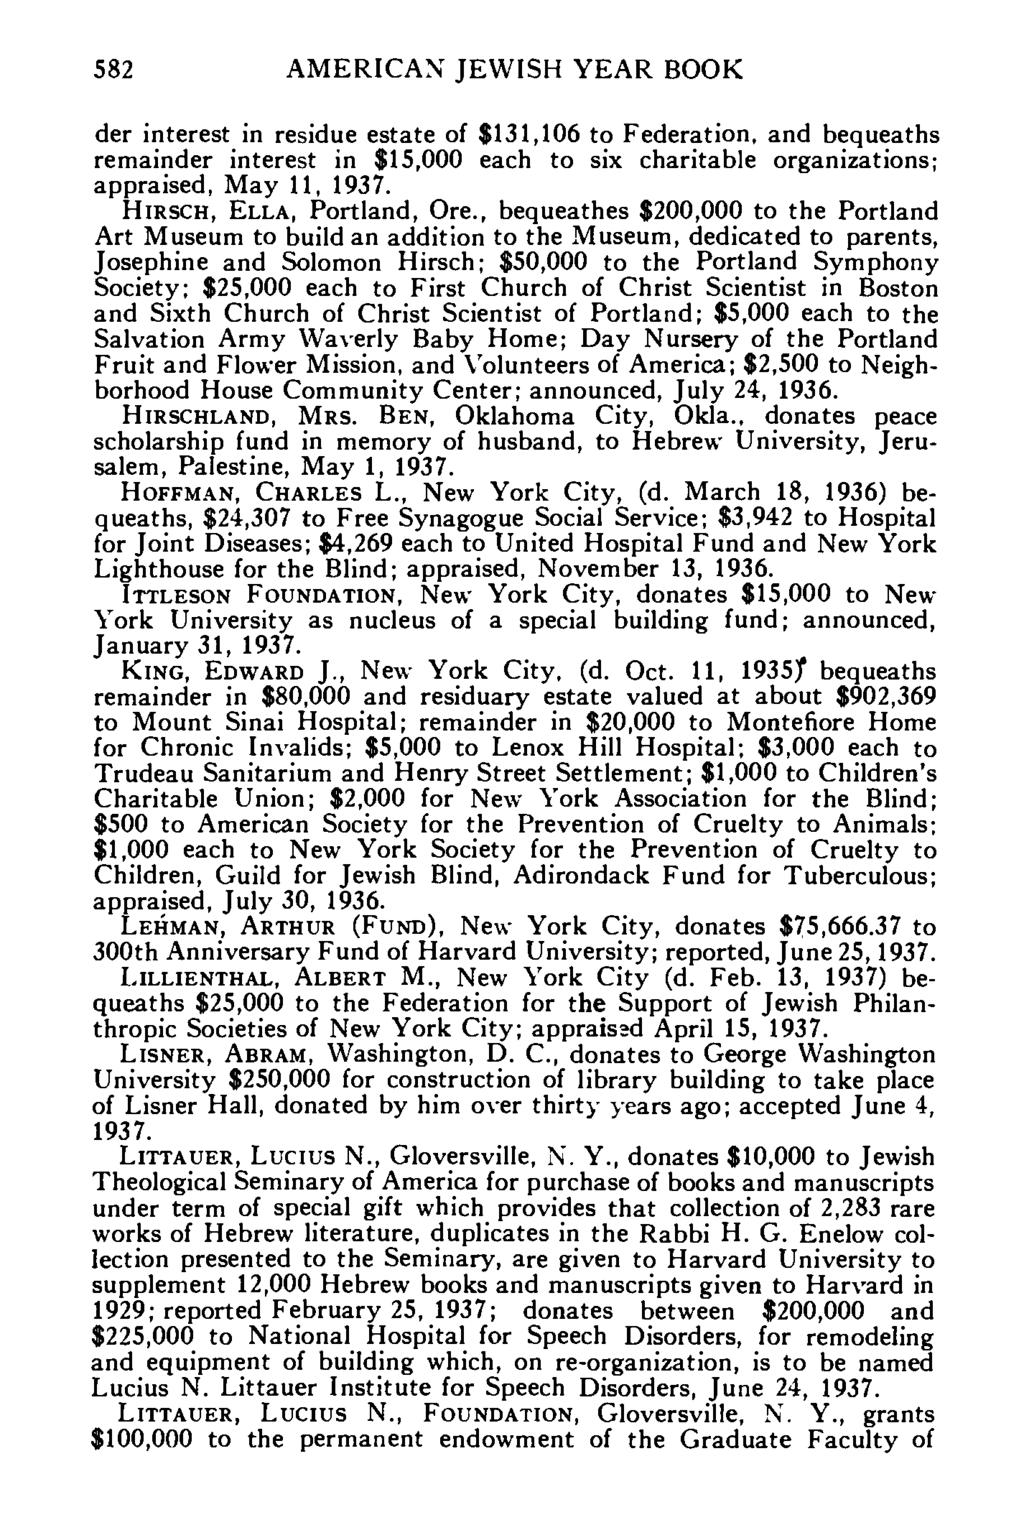 582 AMERICAN JEWISH YEAR BOOK der interest in residue estate of $131,106 to Federation, and bequeaths remainder interest in $15,000 each to six charitable organizations; appraised, May 11, 1937.